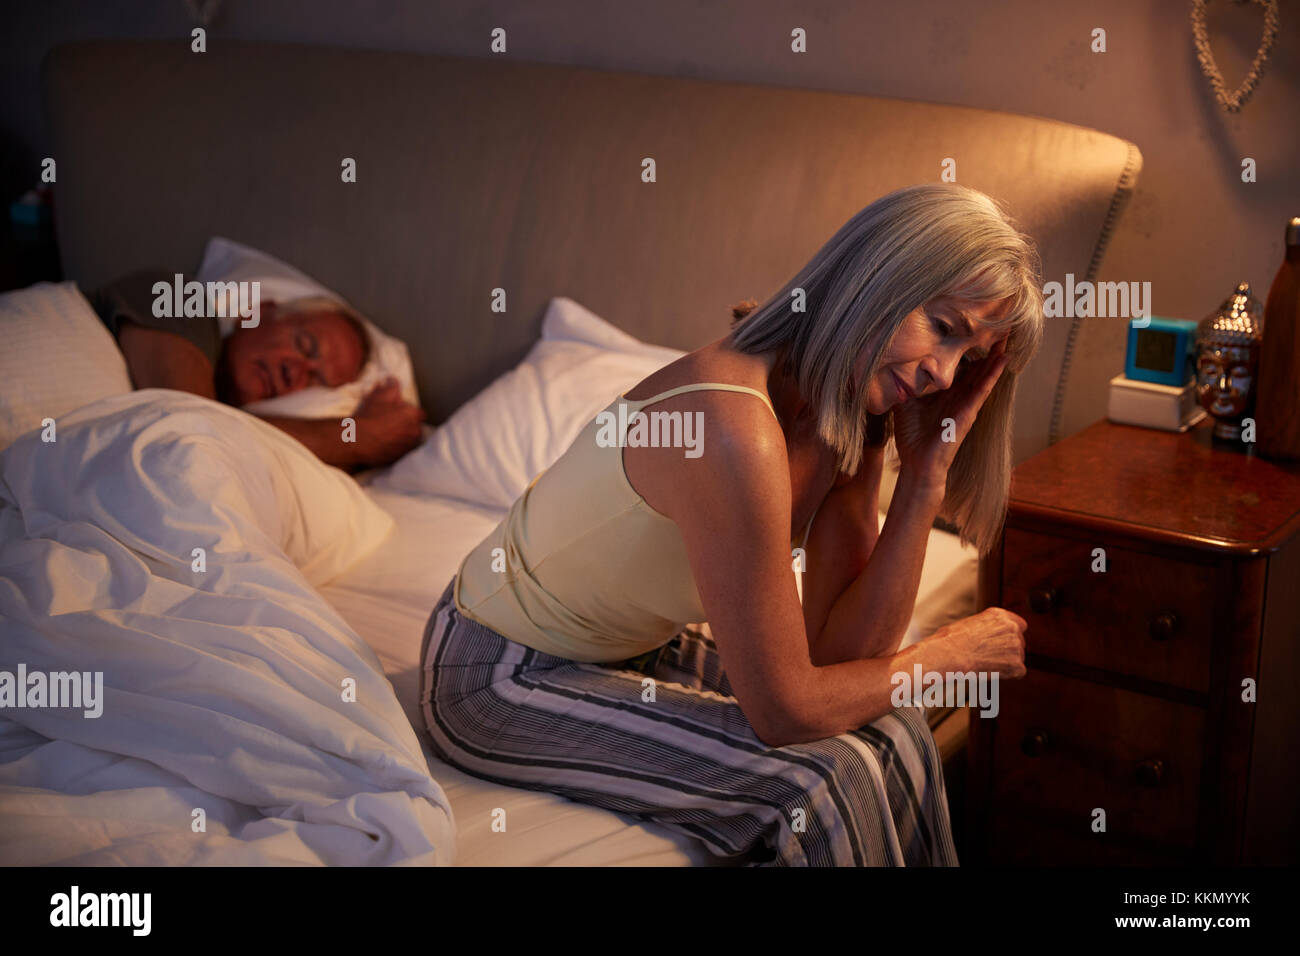 Worried Senior Woman In Bed At Night Suffering With Insomnia Stock Photo